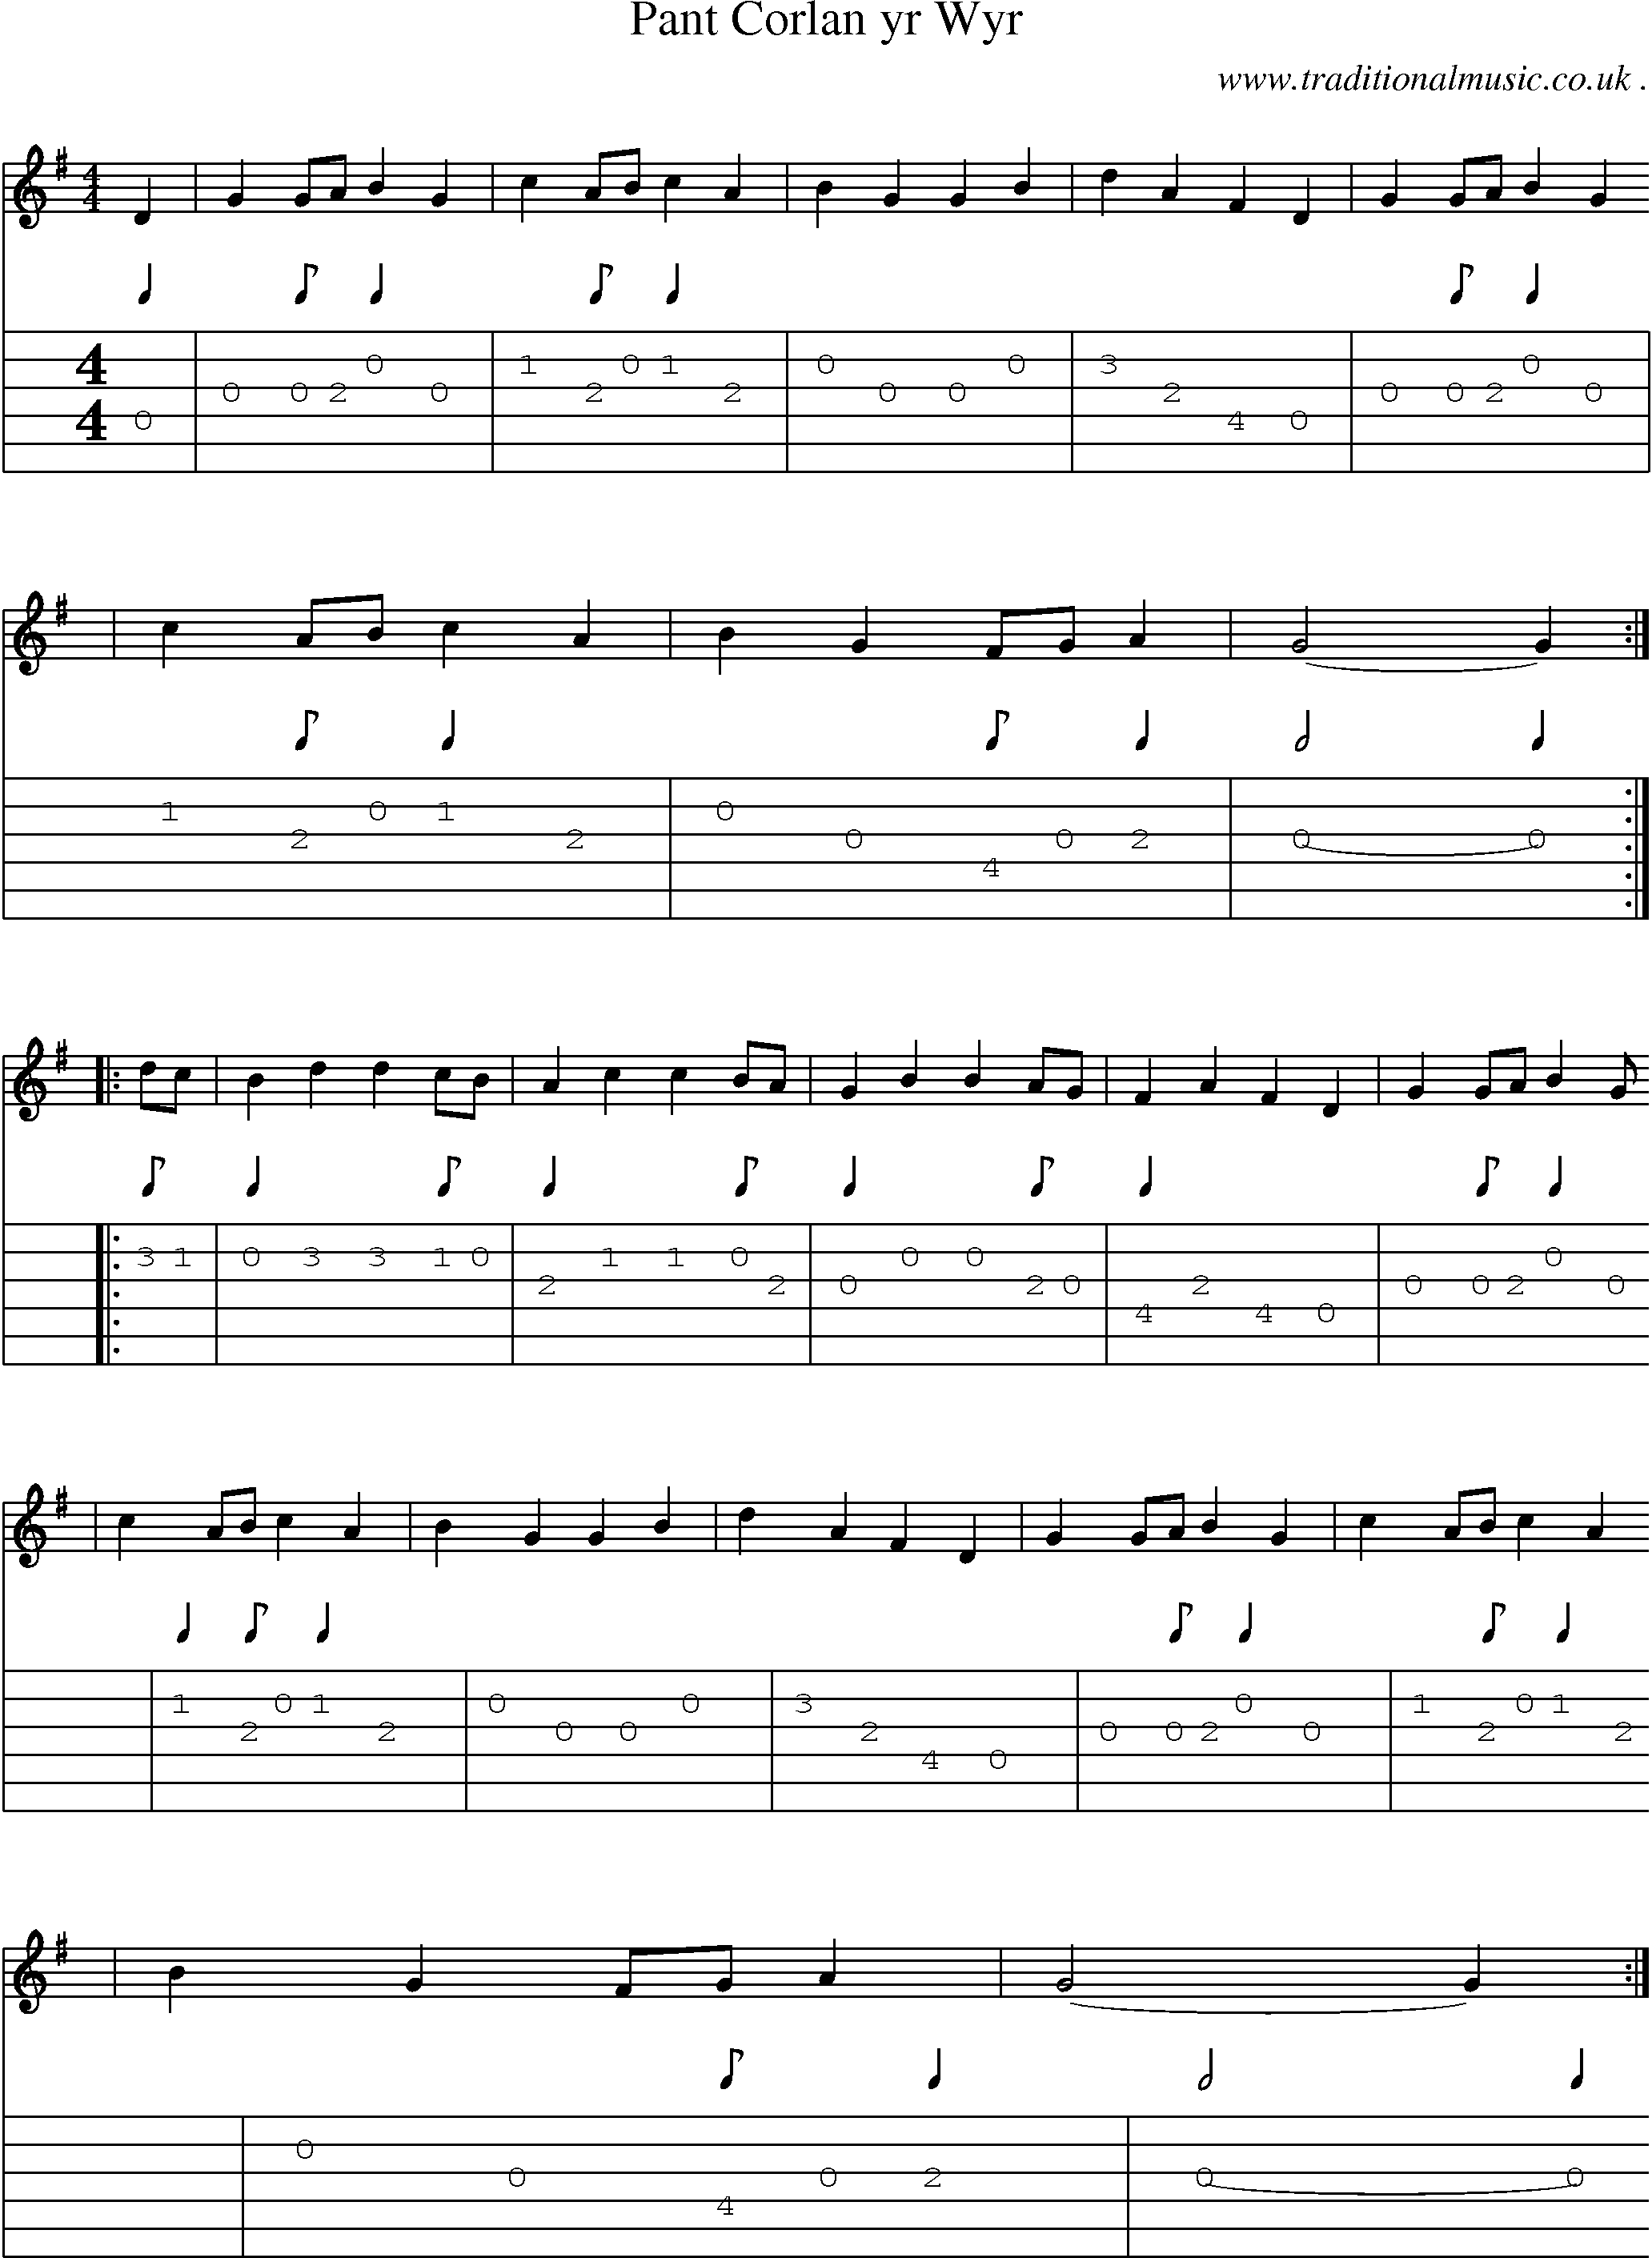 Sheet-Music and Guitar Tabs for Pant Corlan Yr Wyr